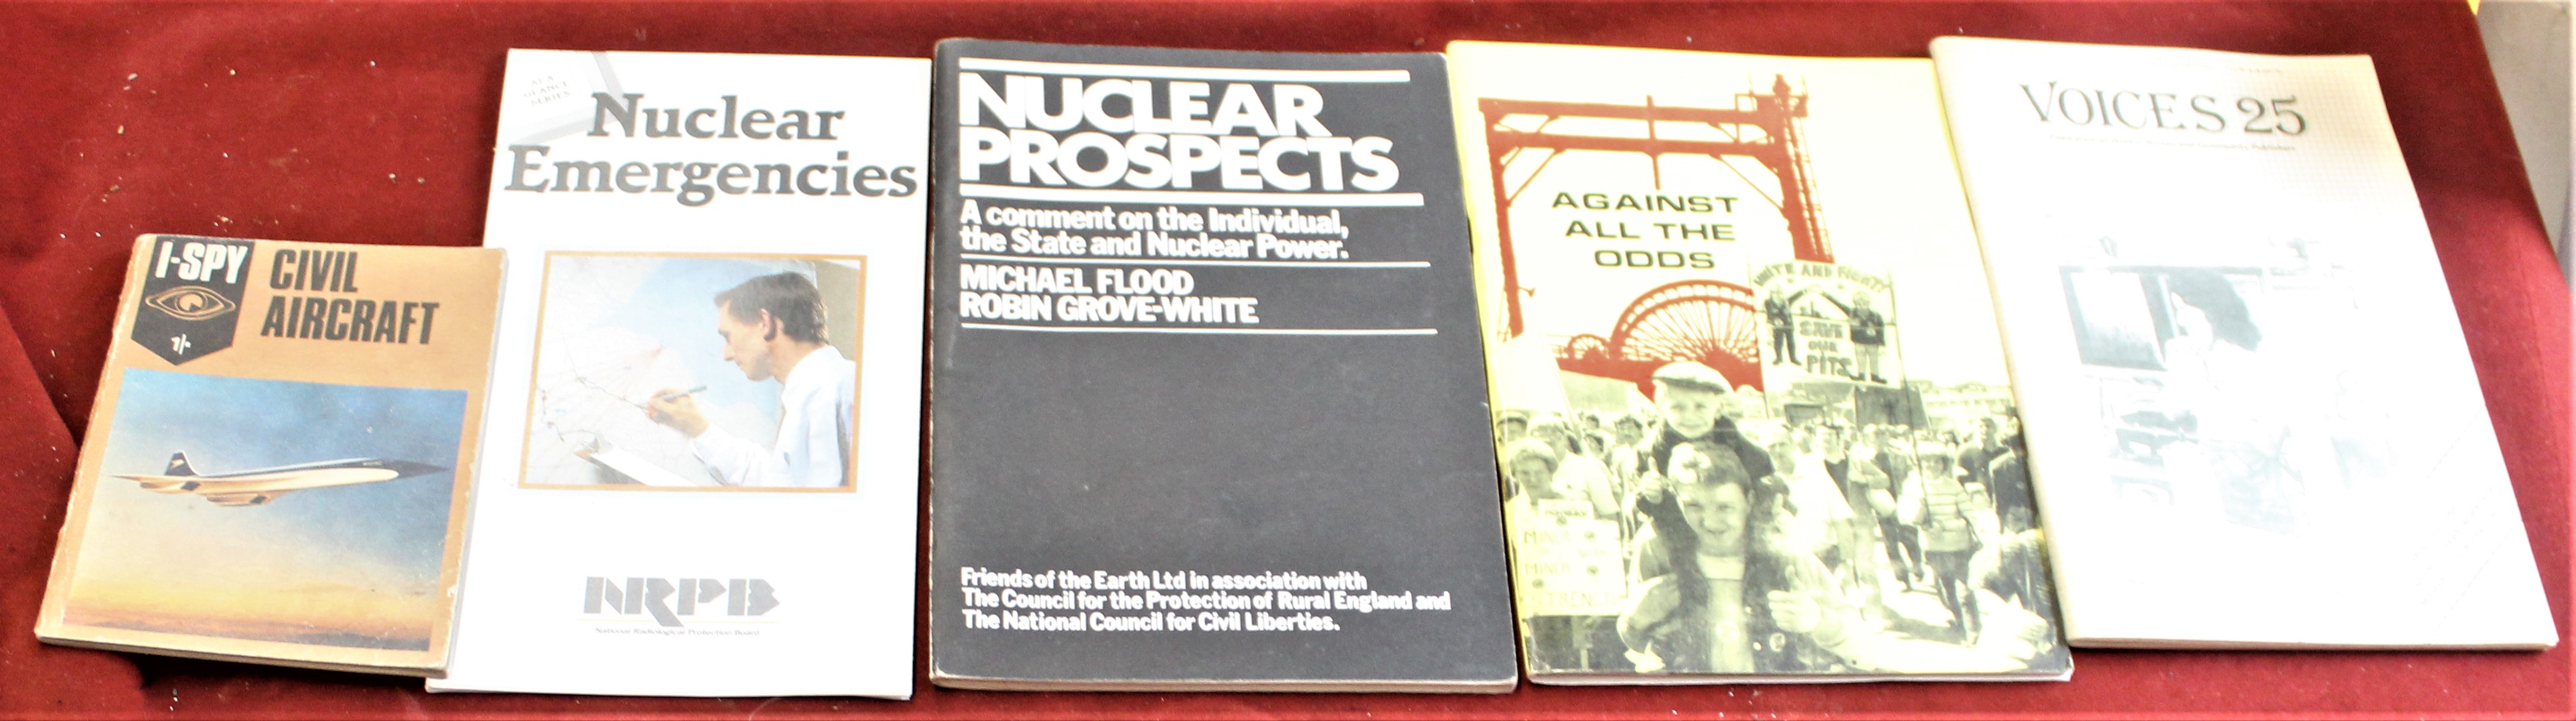 British 1980s Socialist booklets (5 in total) including 'Nuclear Emergencies', 'Nuclear Prospects'